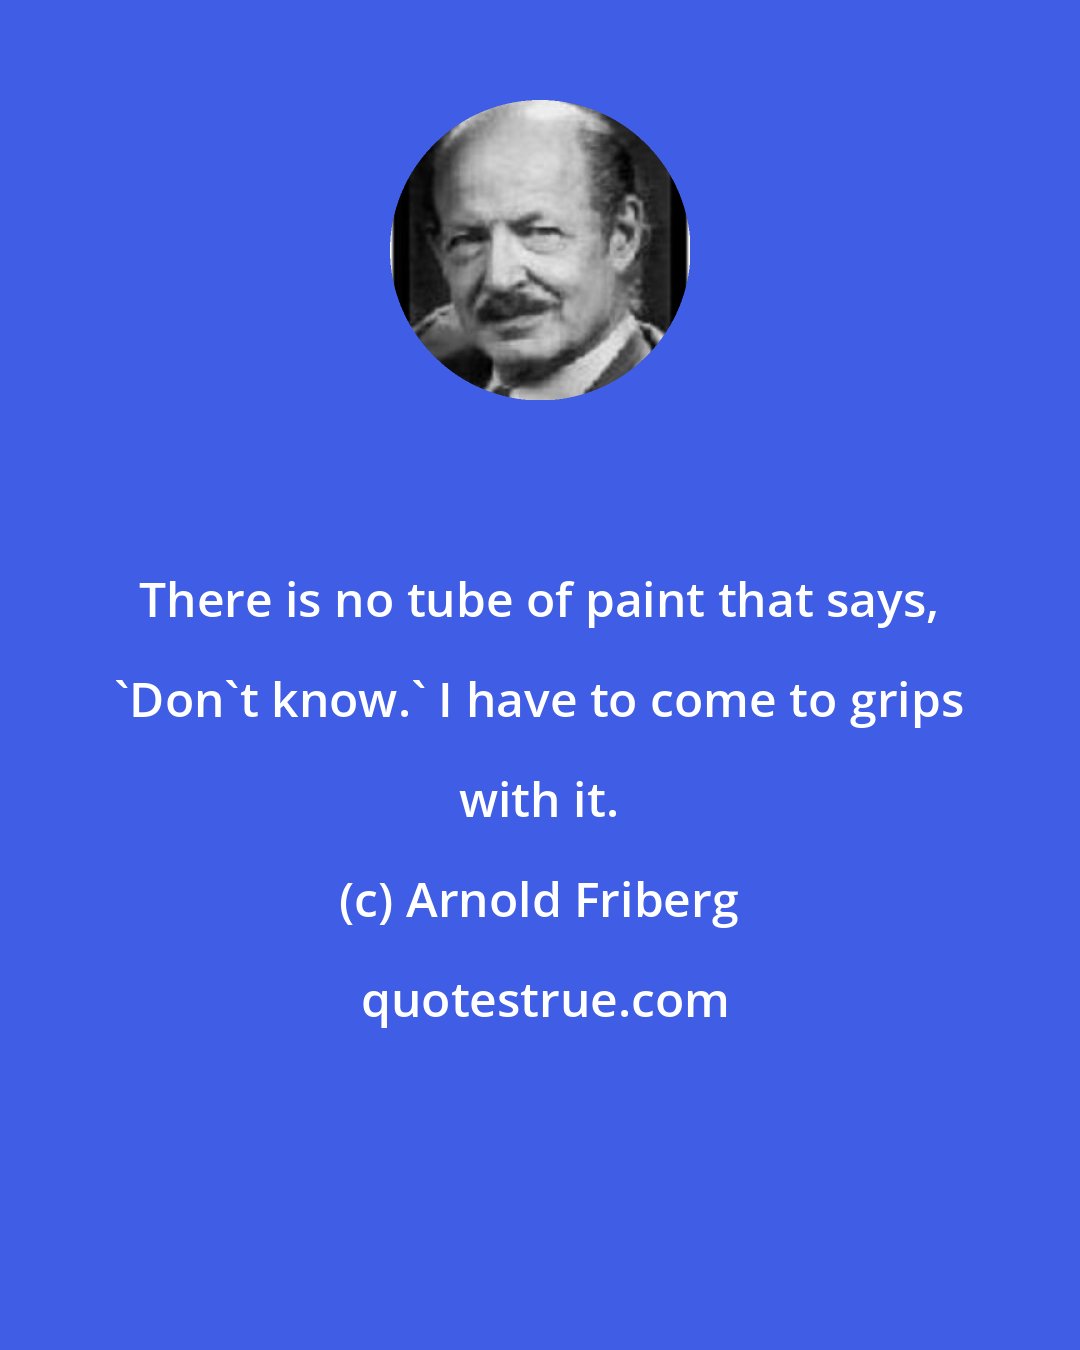 Arnold Friberg: There is no tube of paint that says, 'Don't know.' I have to come to grips with it.